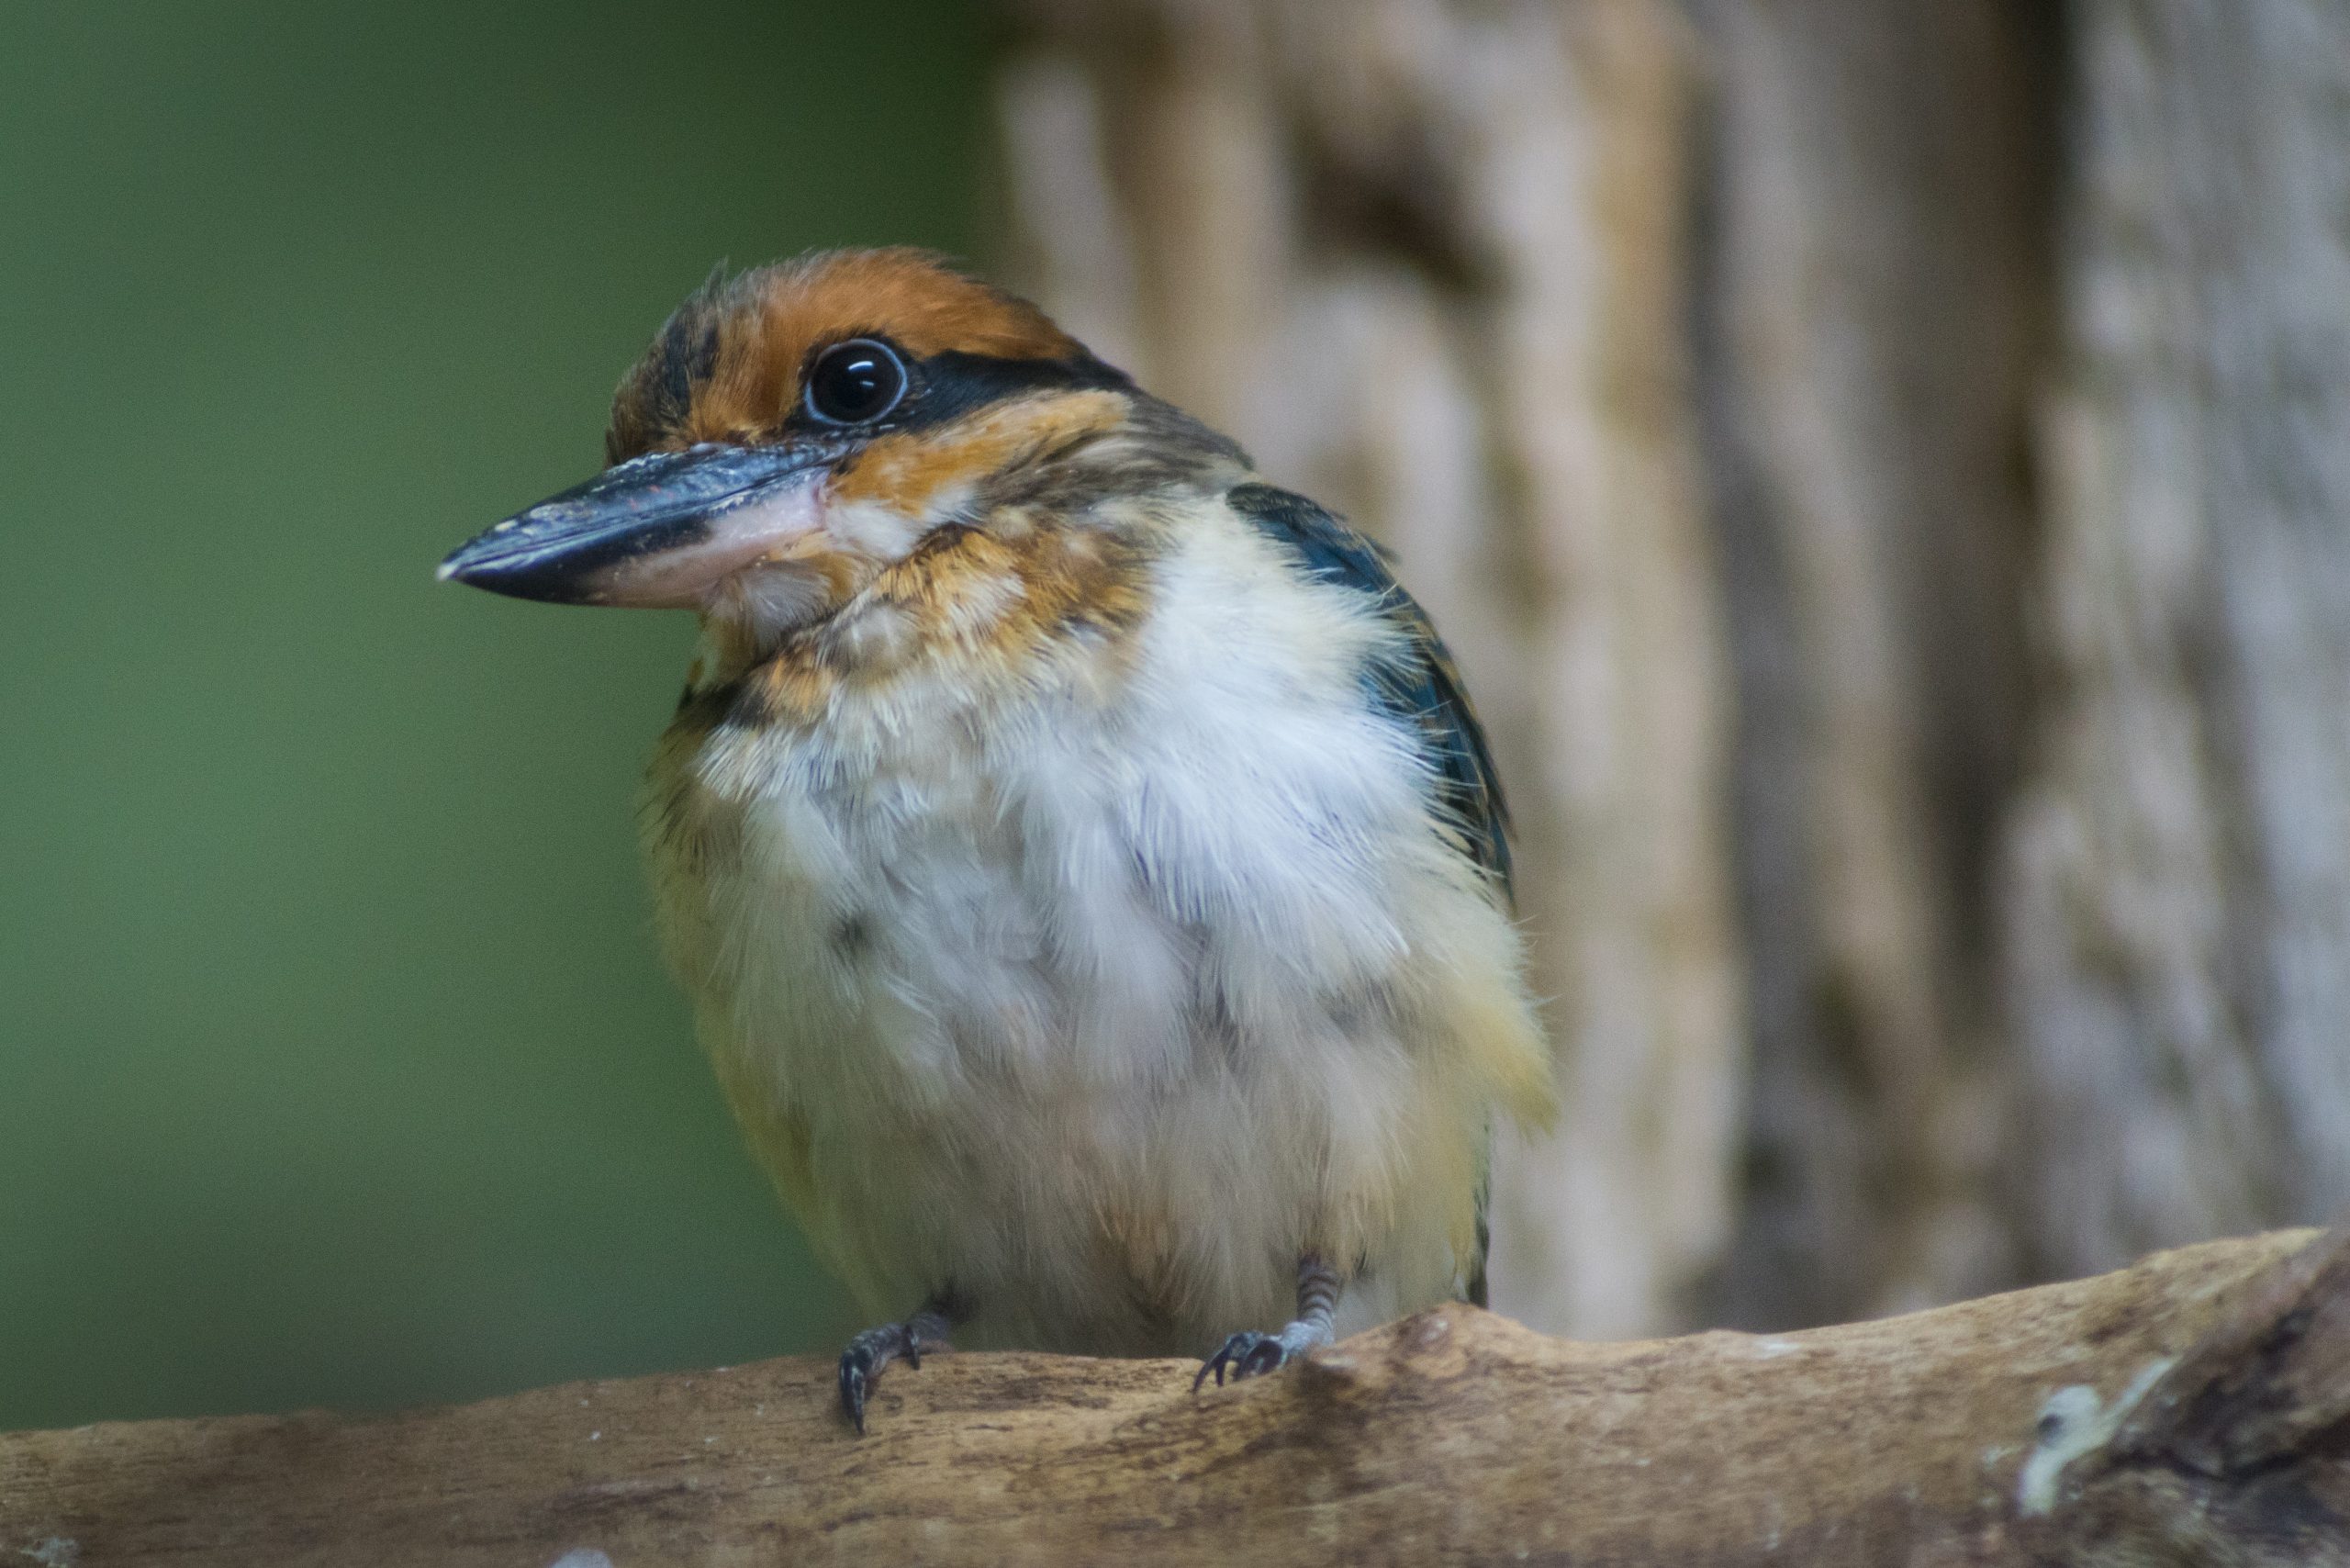 Female Guam Kingfisher perched on a branch